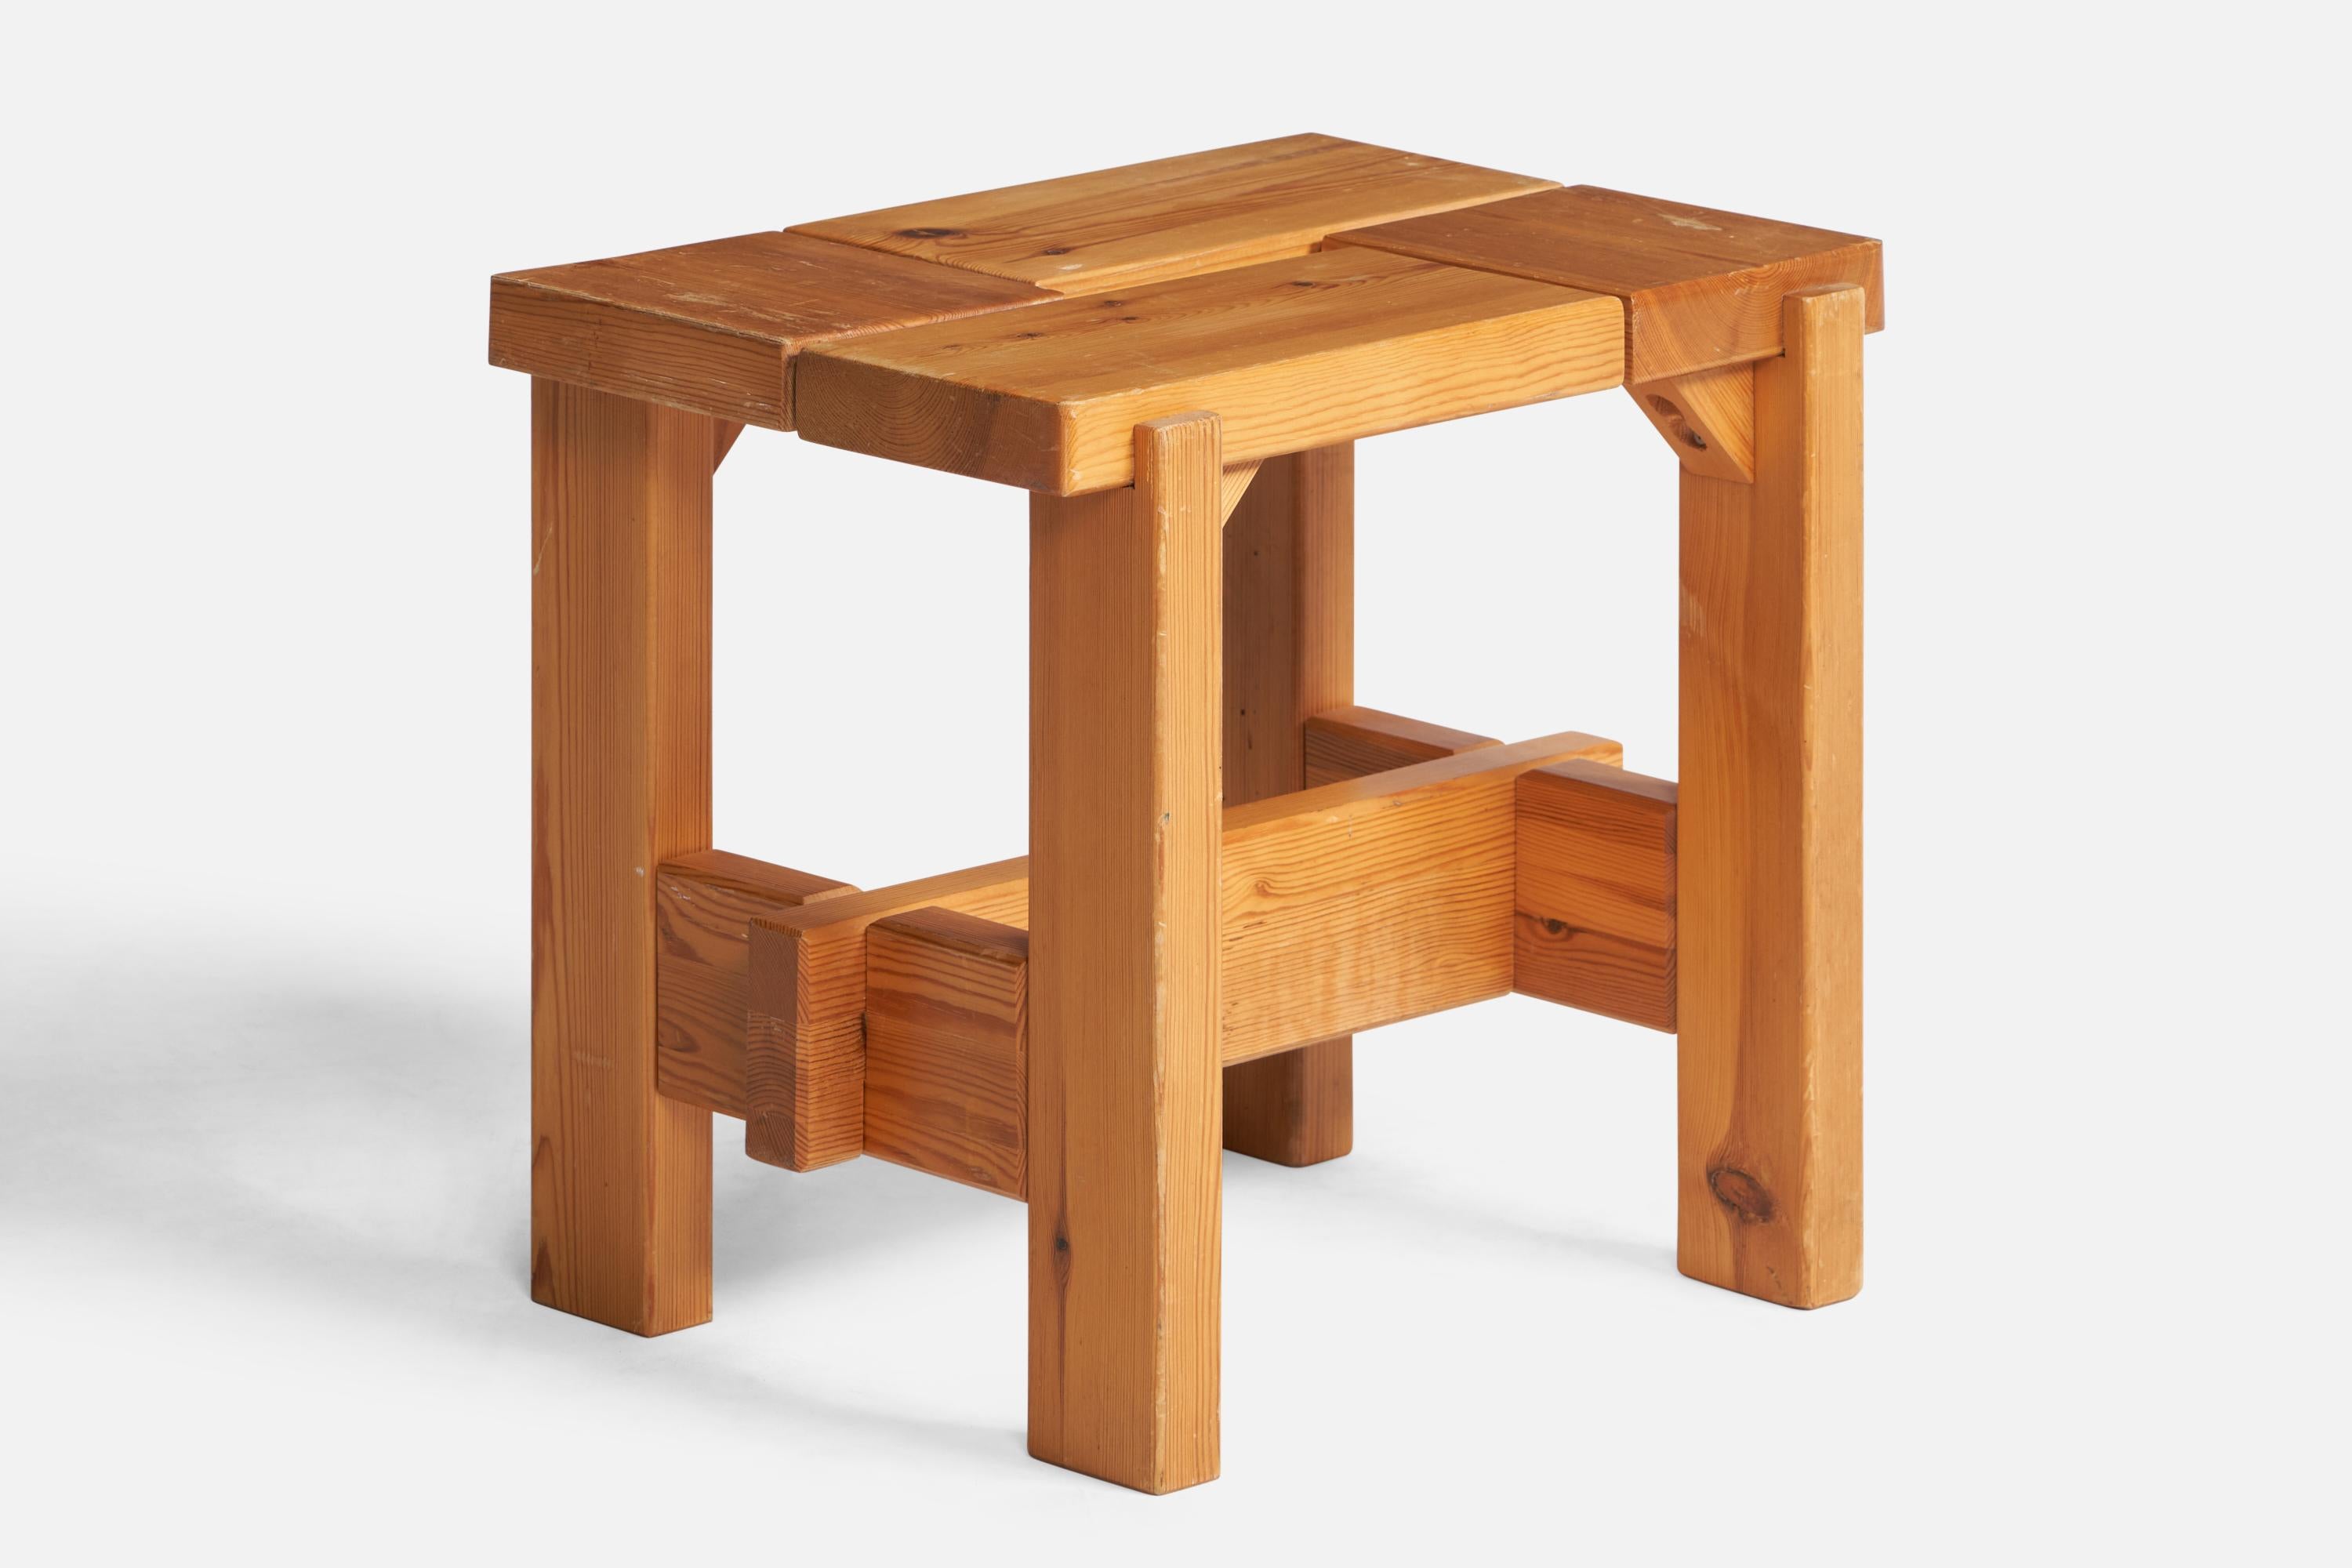 A pine stool designed and produced in Sweden, 1970s.

Seat height: 15.75”